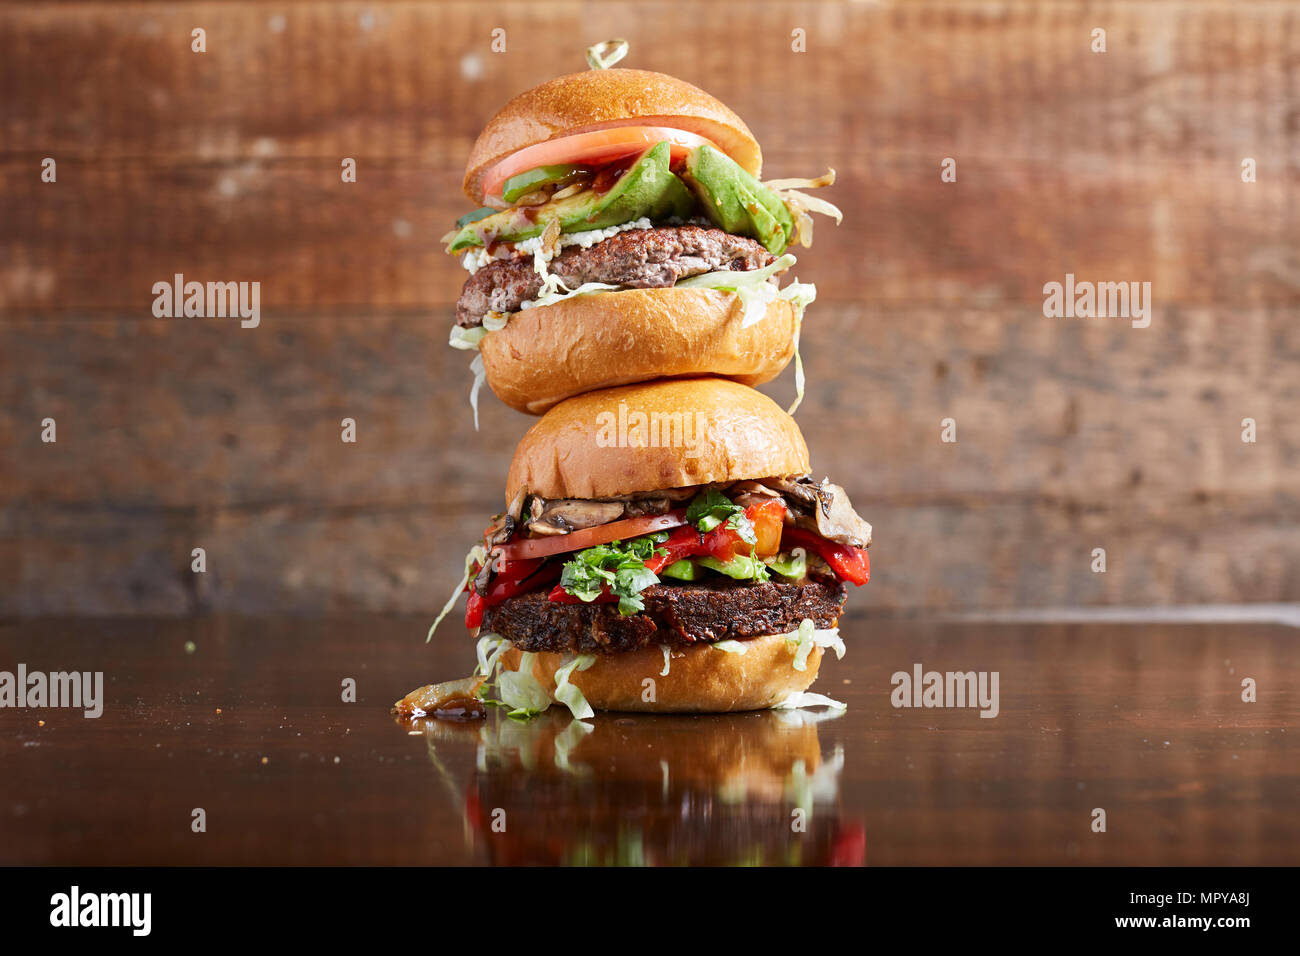 Close-up of cheeseburgers on wooden table Stock Photo